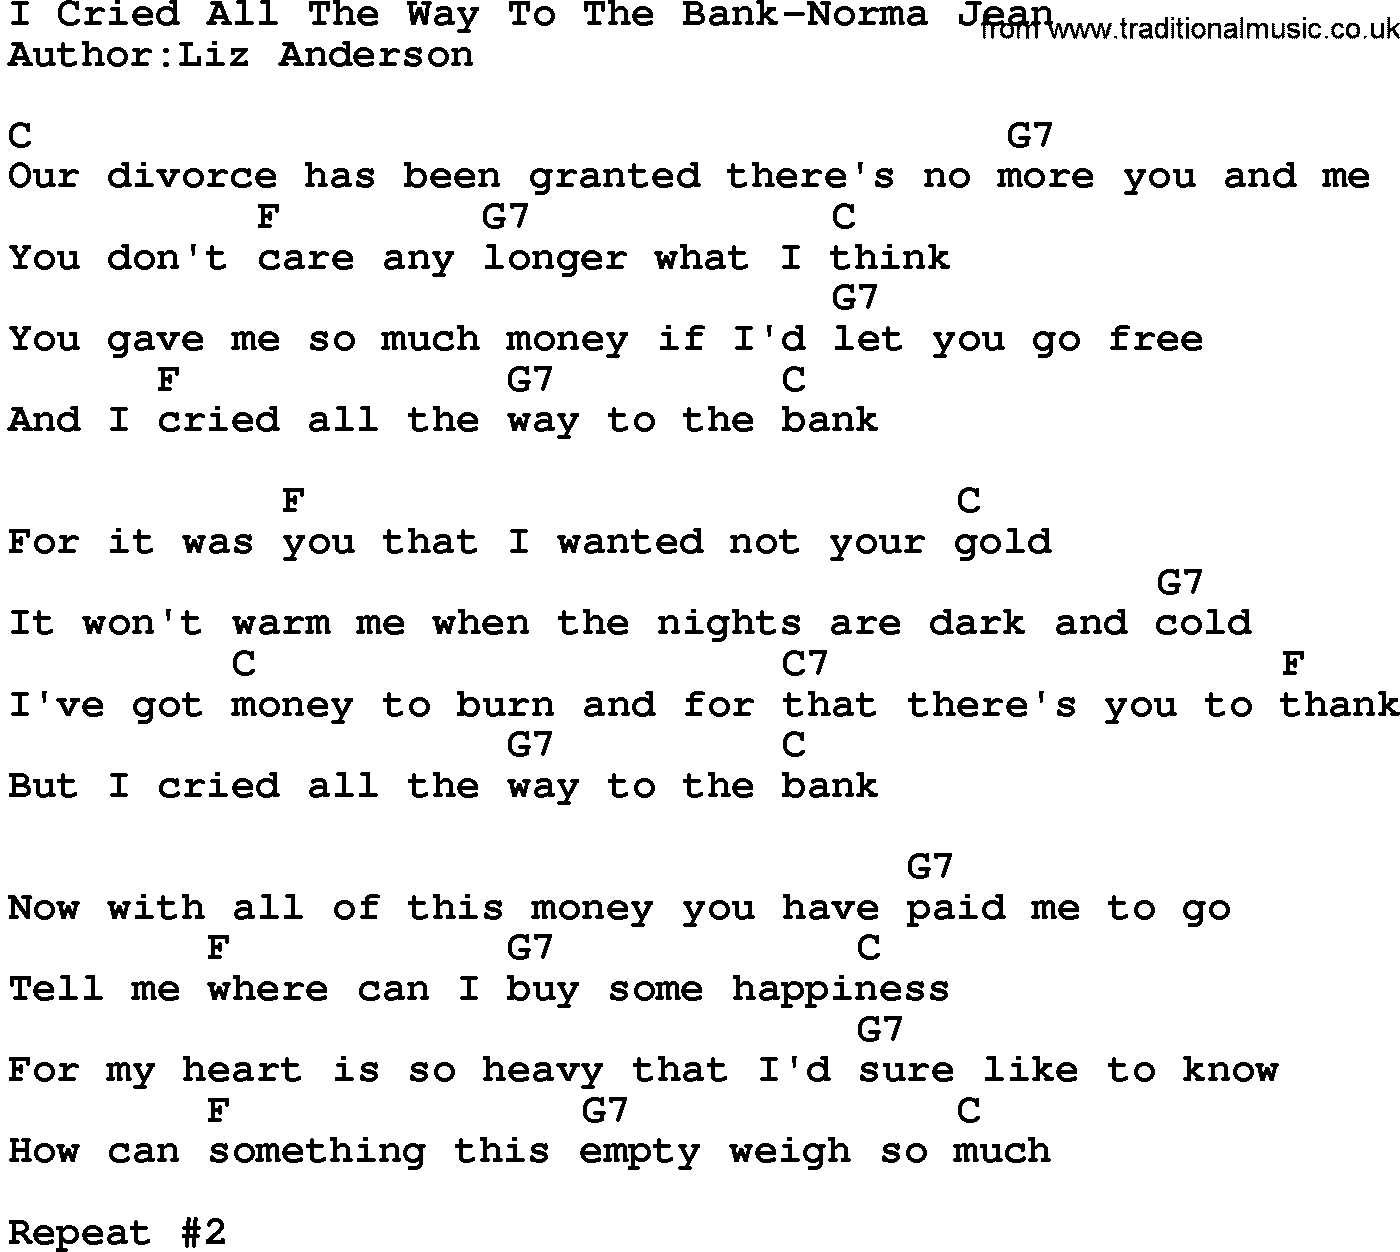 Country music song: I Cried All The Way To The Bank-Norma Jean lyrics and chords